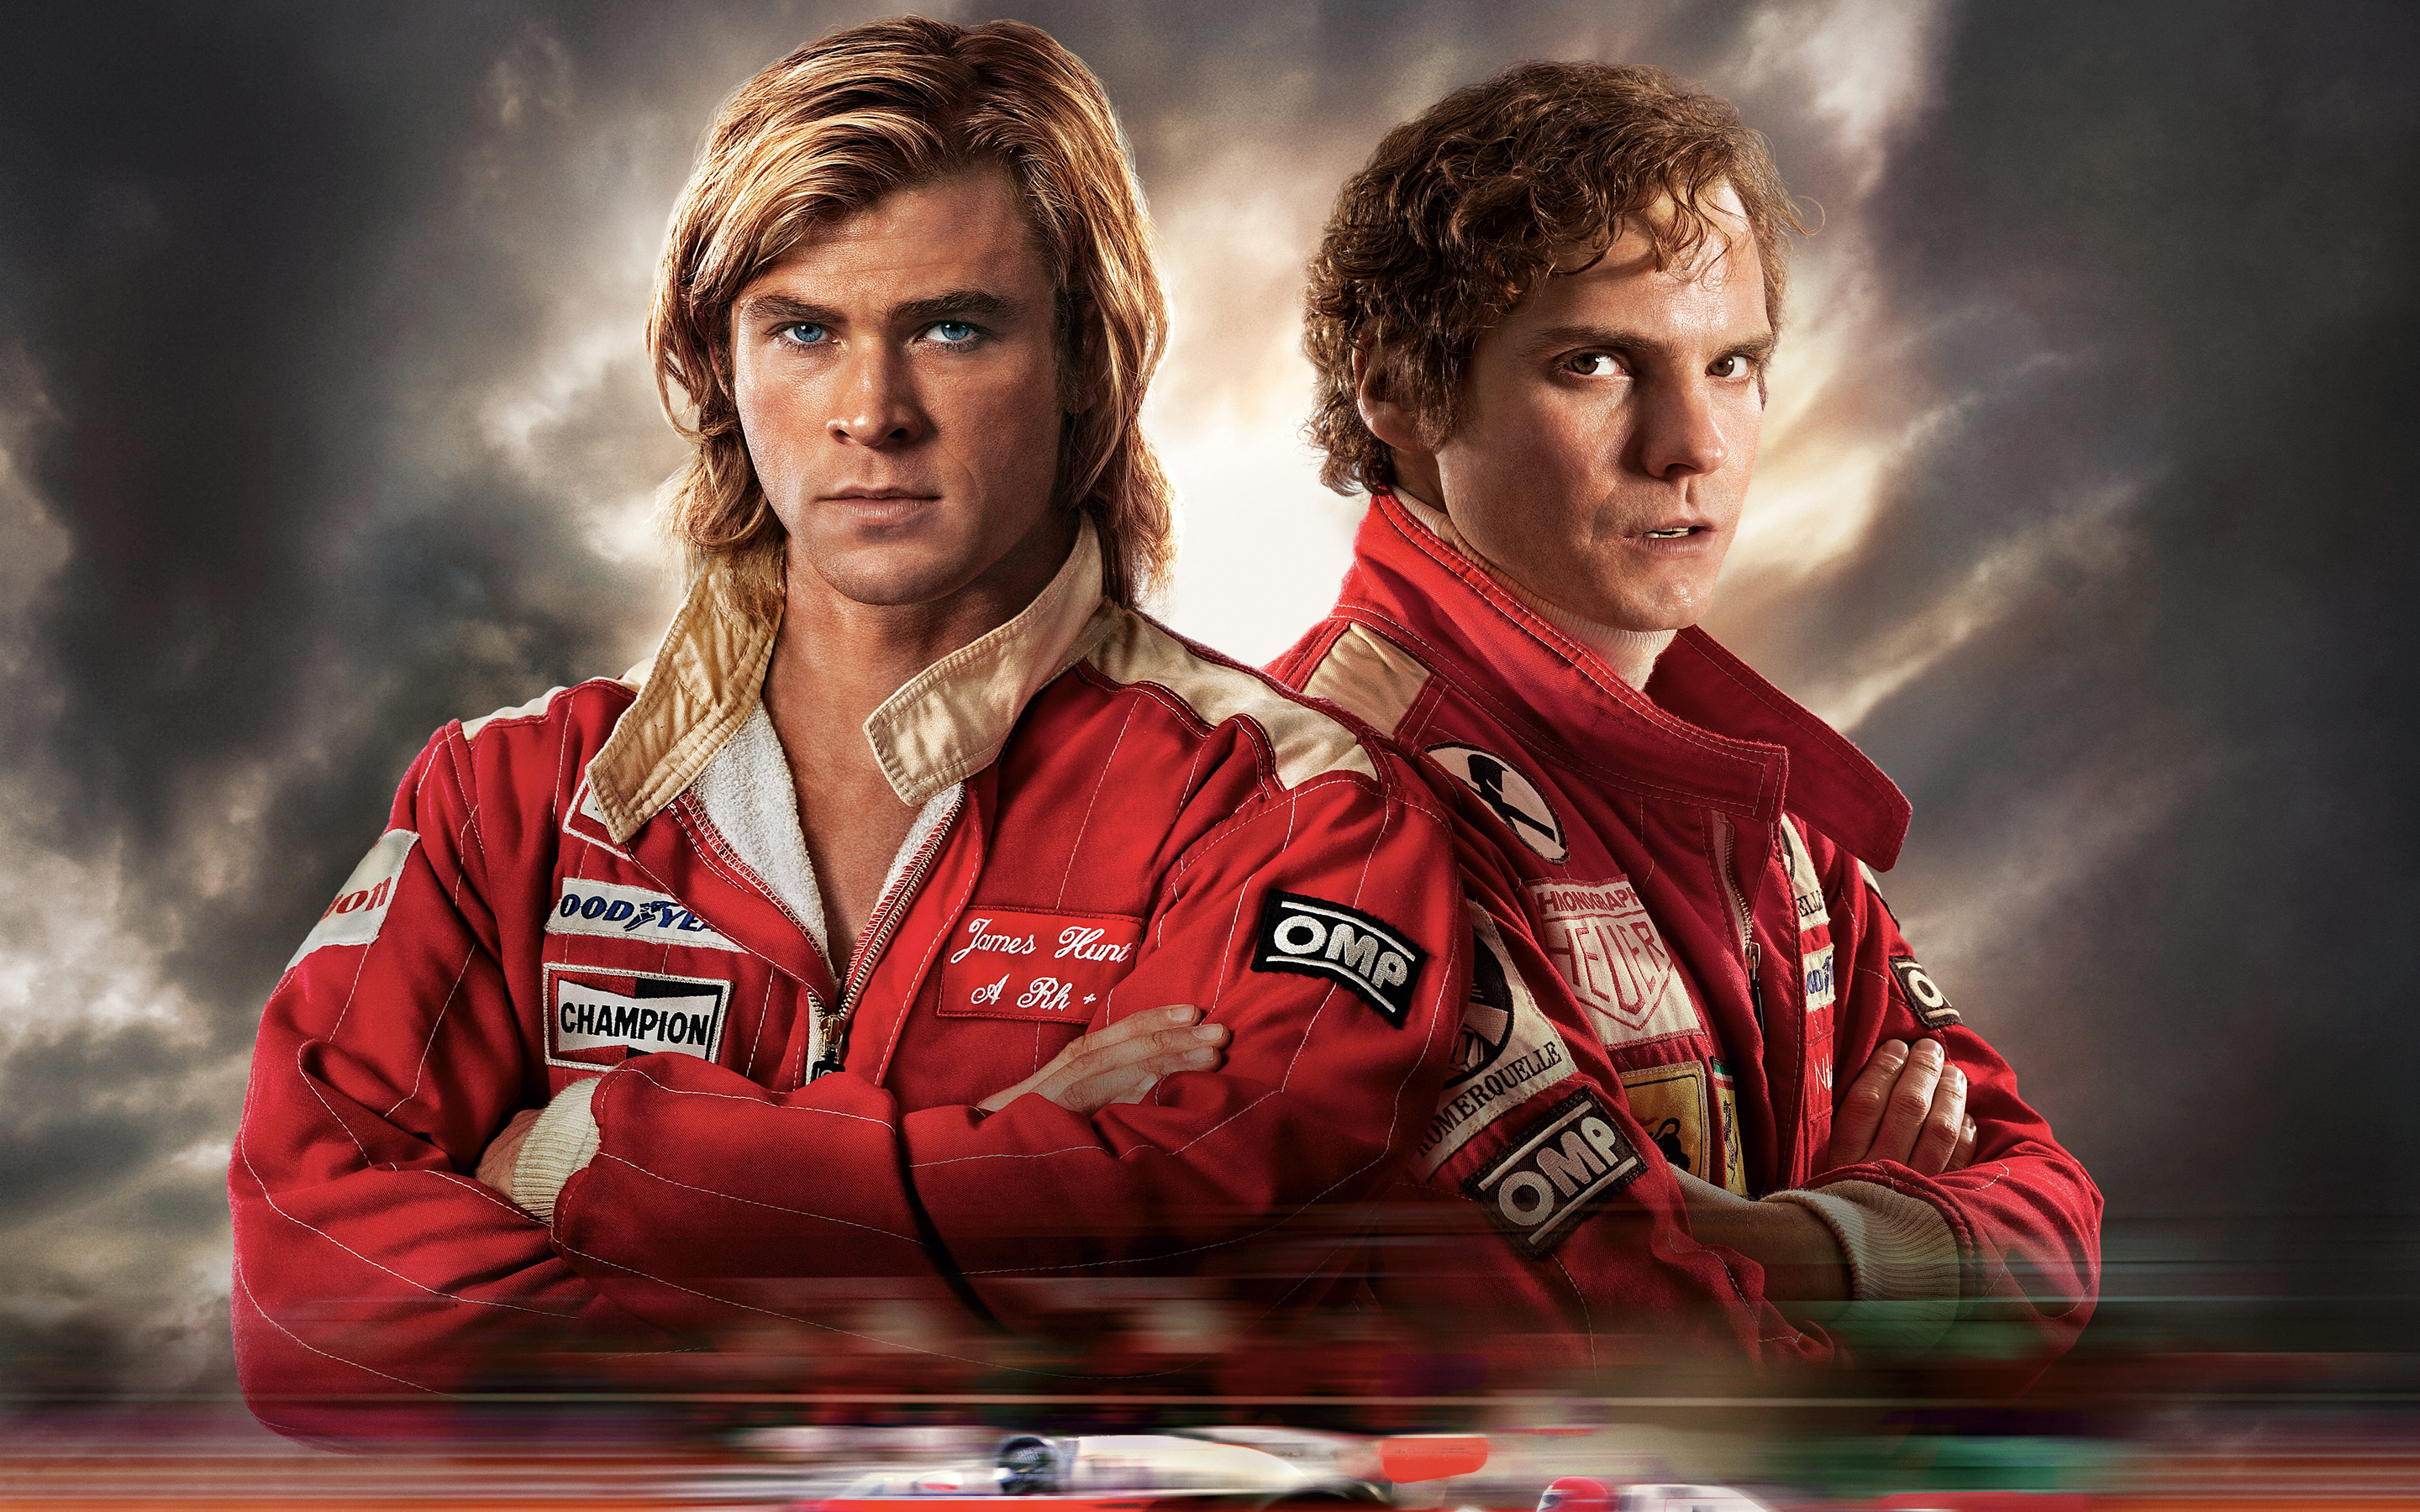 HD wallpaper featuring two racing drivers from the movie Rush (2013), set against a dramatic cloudy sky.